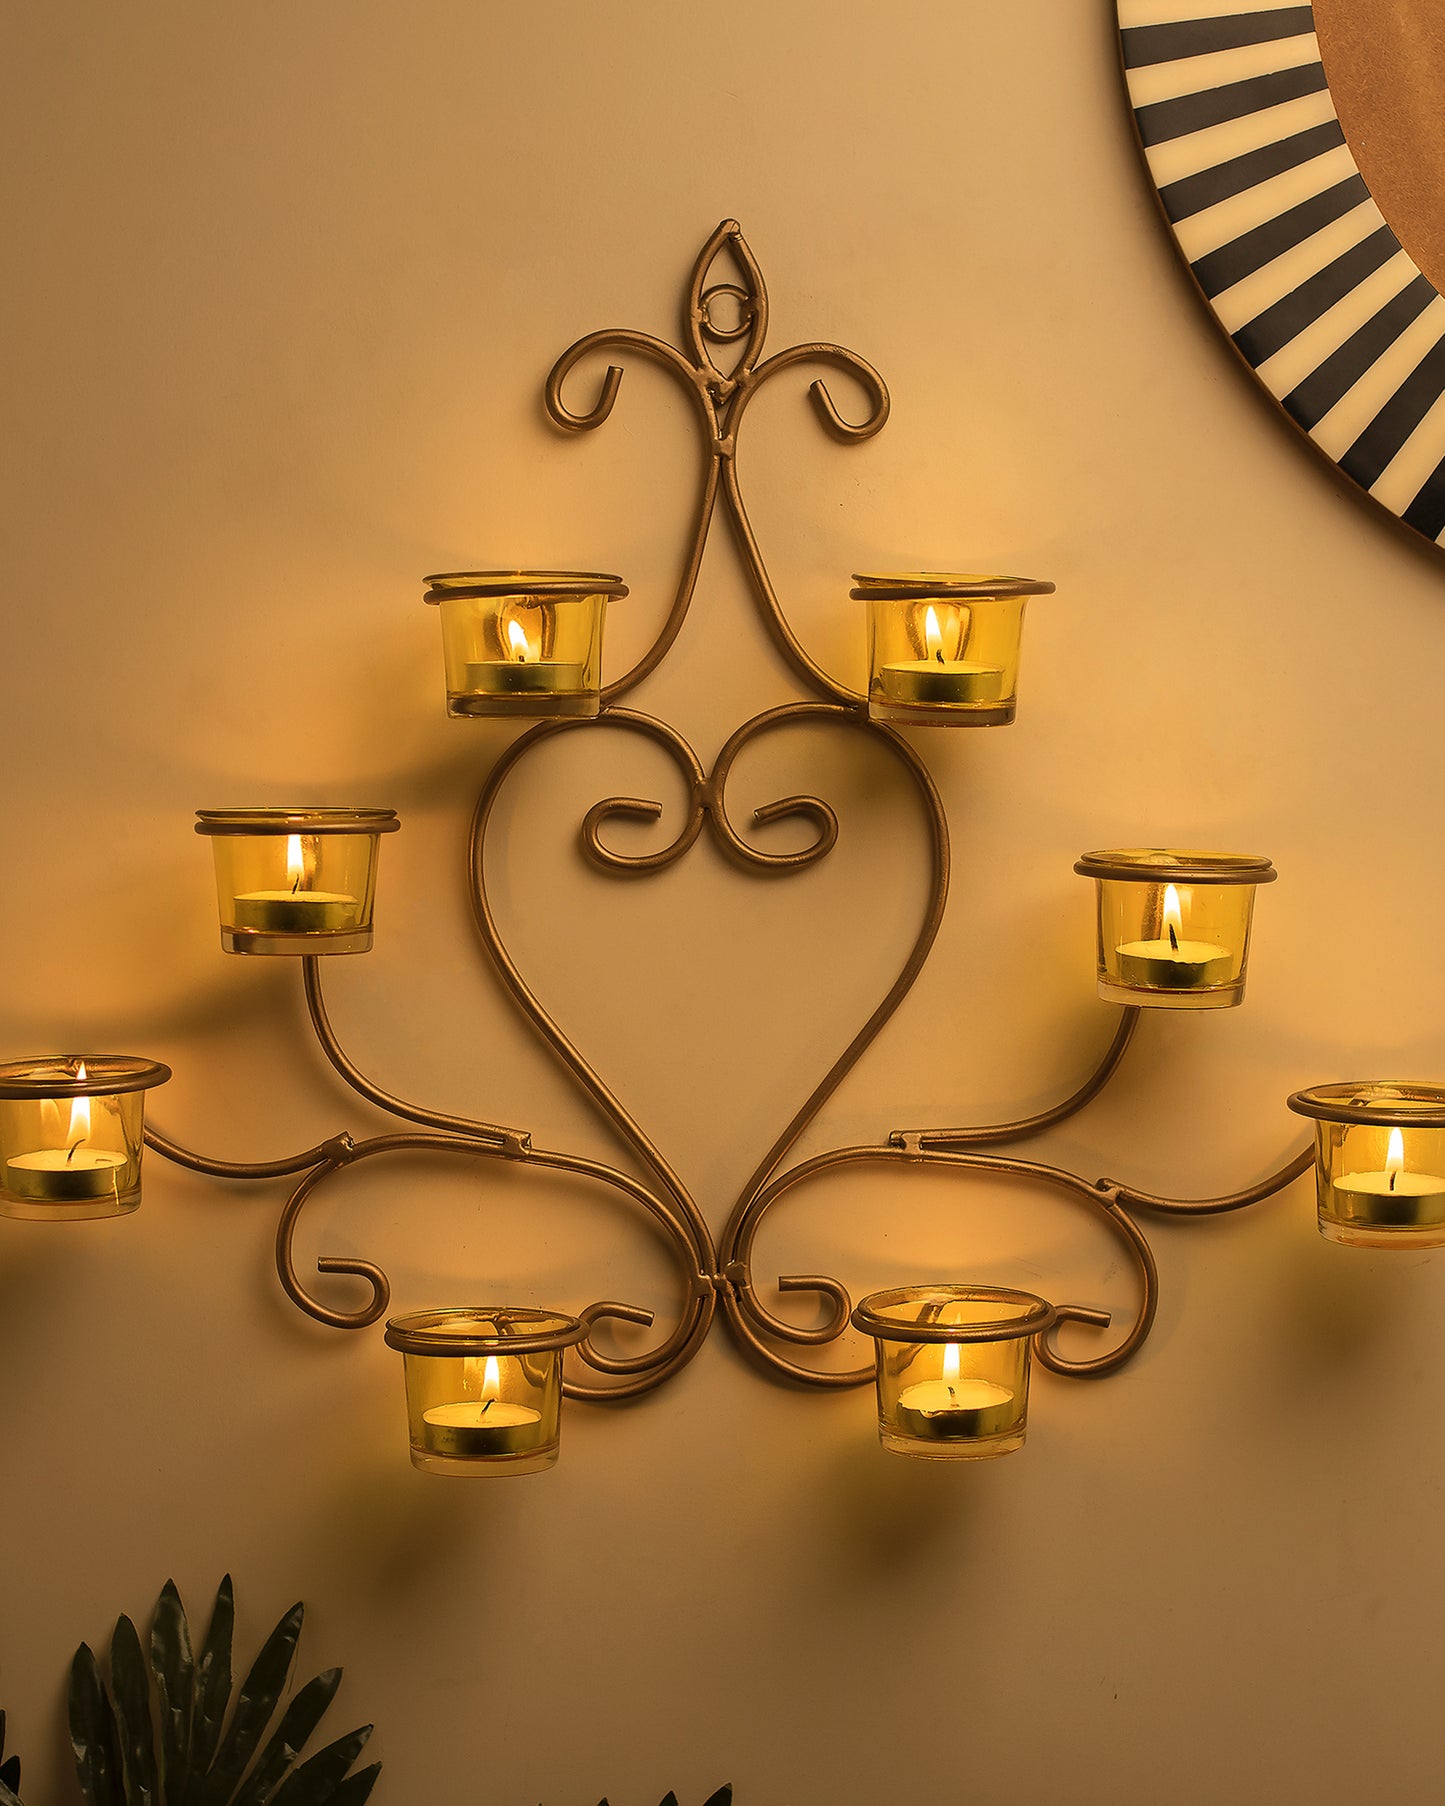 8-Votive Chic Golden Iron Wall Sconce Candle Holder, Candle Tealight Holder,Wall art